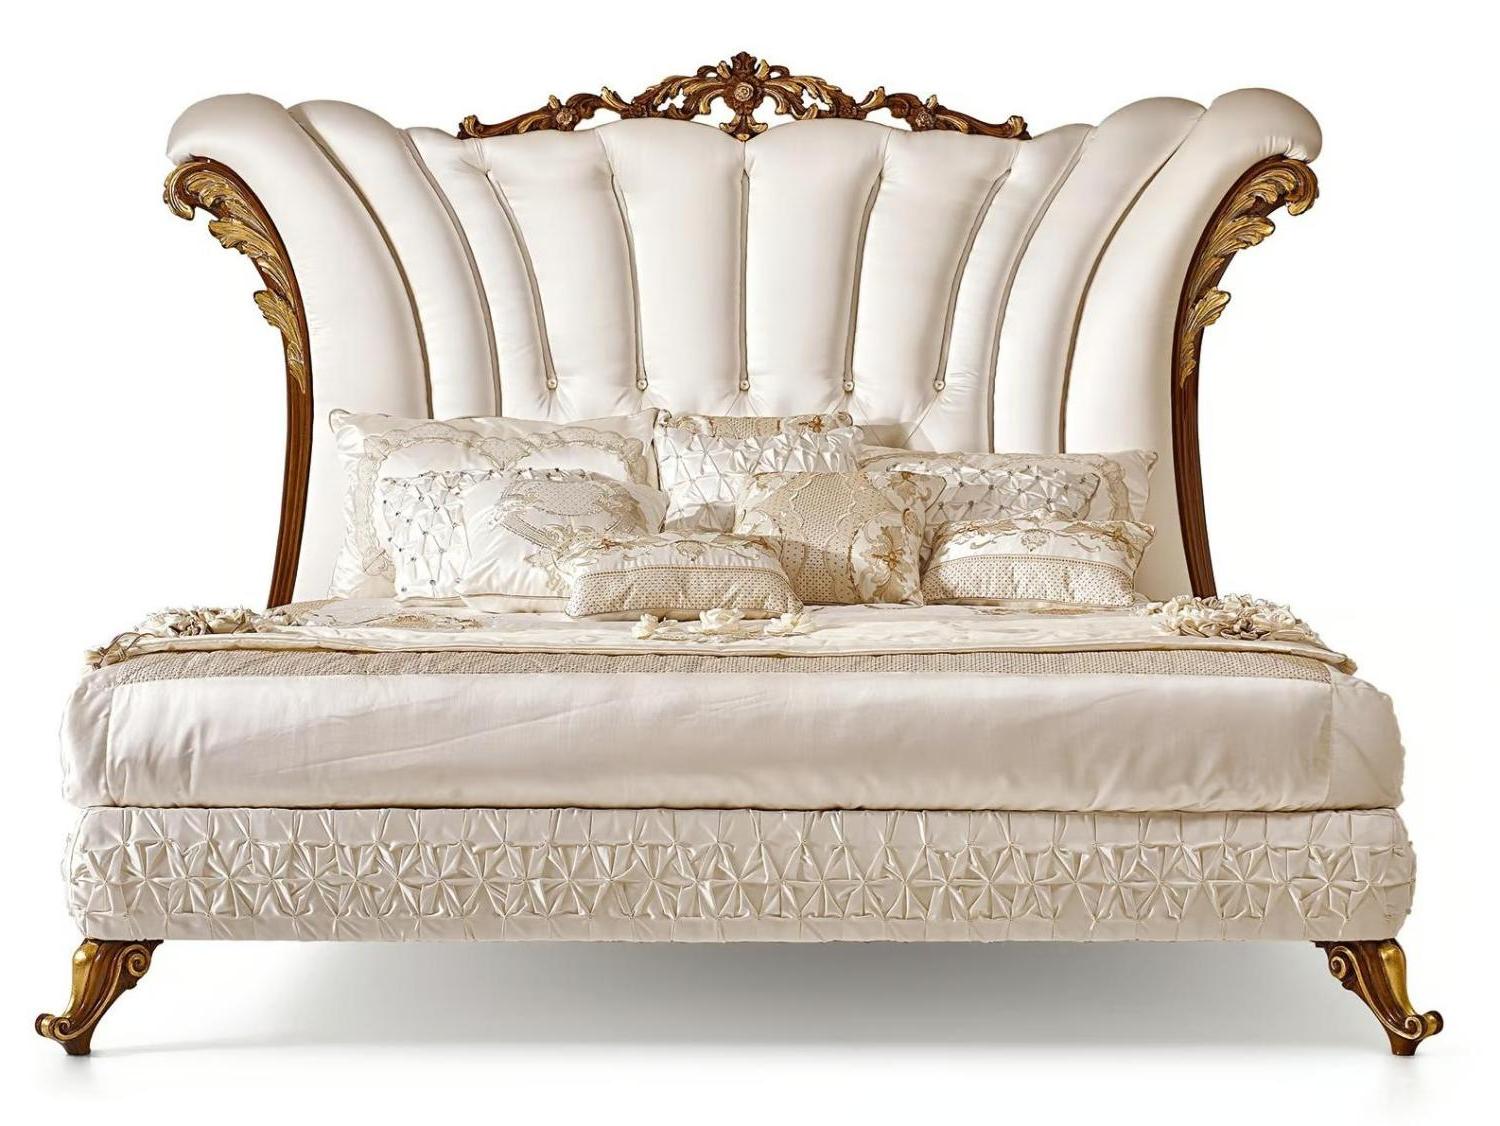 Dolcevita Artisan Bed with Headboard